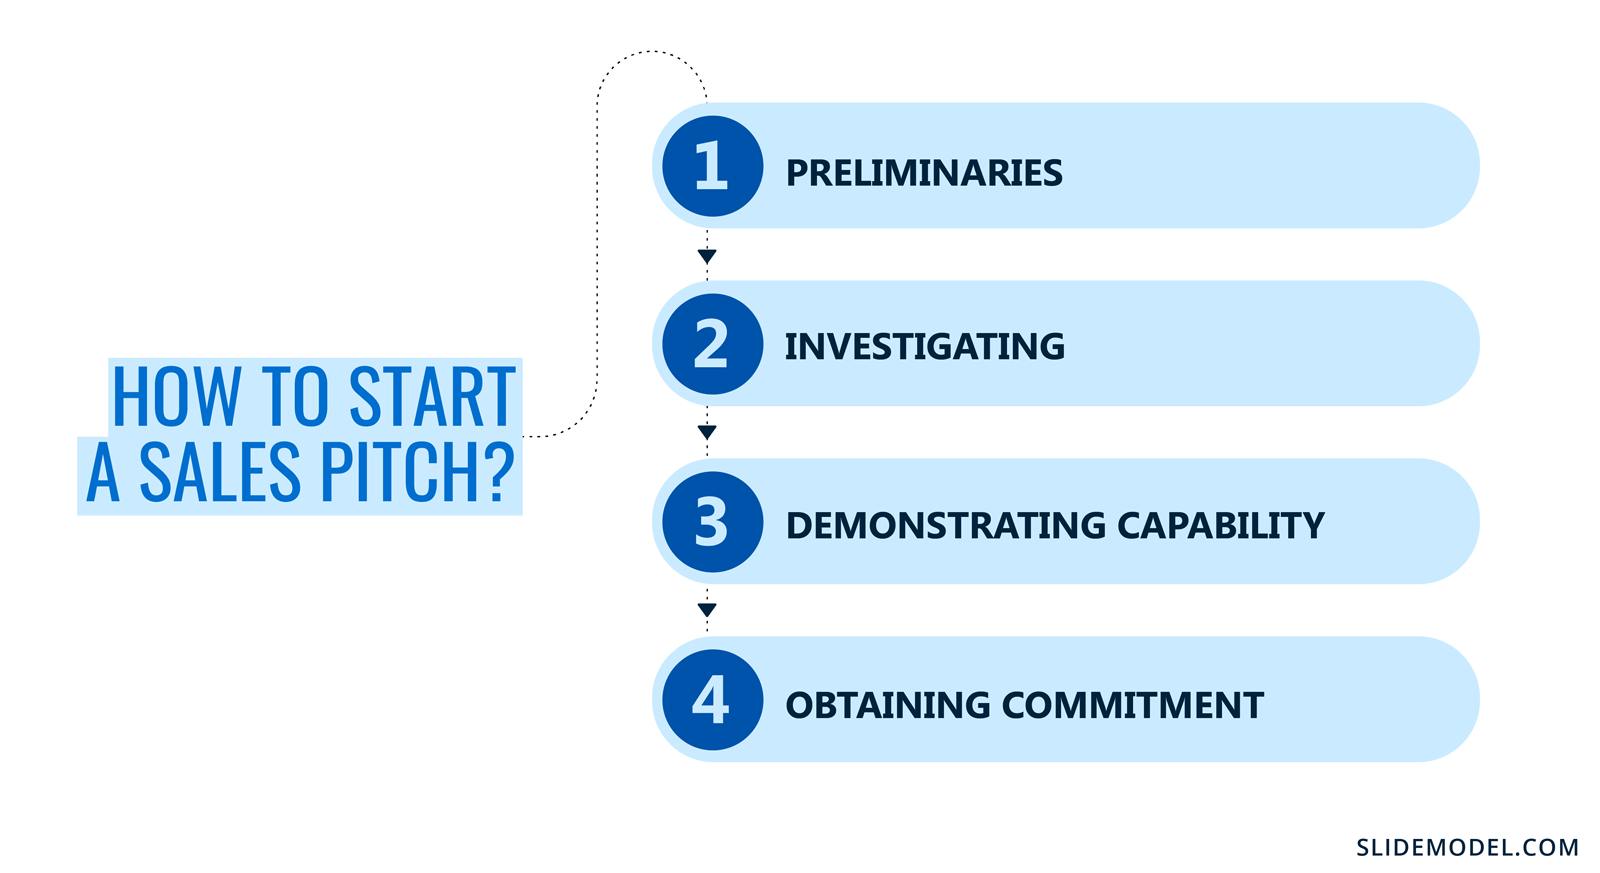 Four steps to start a sales pitch. Preliminaries, investigating, demonstrating capabilities, obtaining commitment